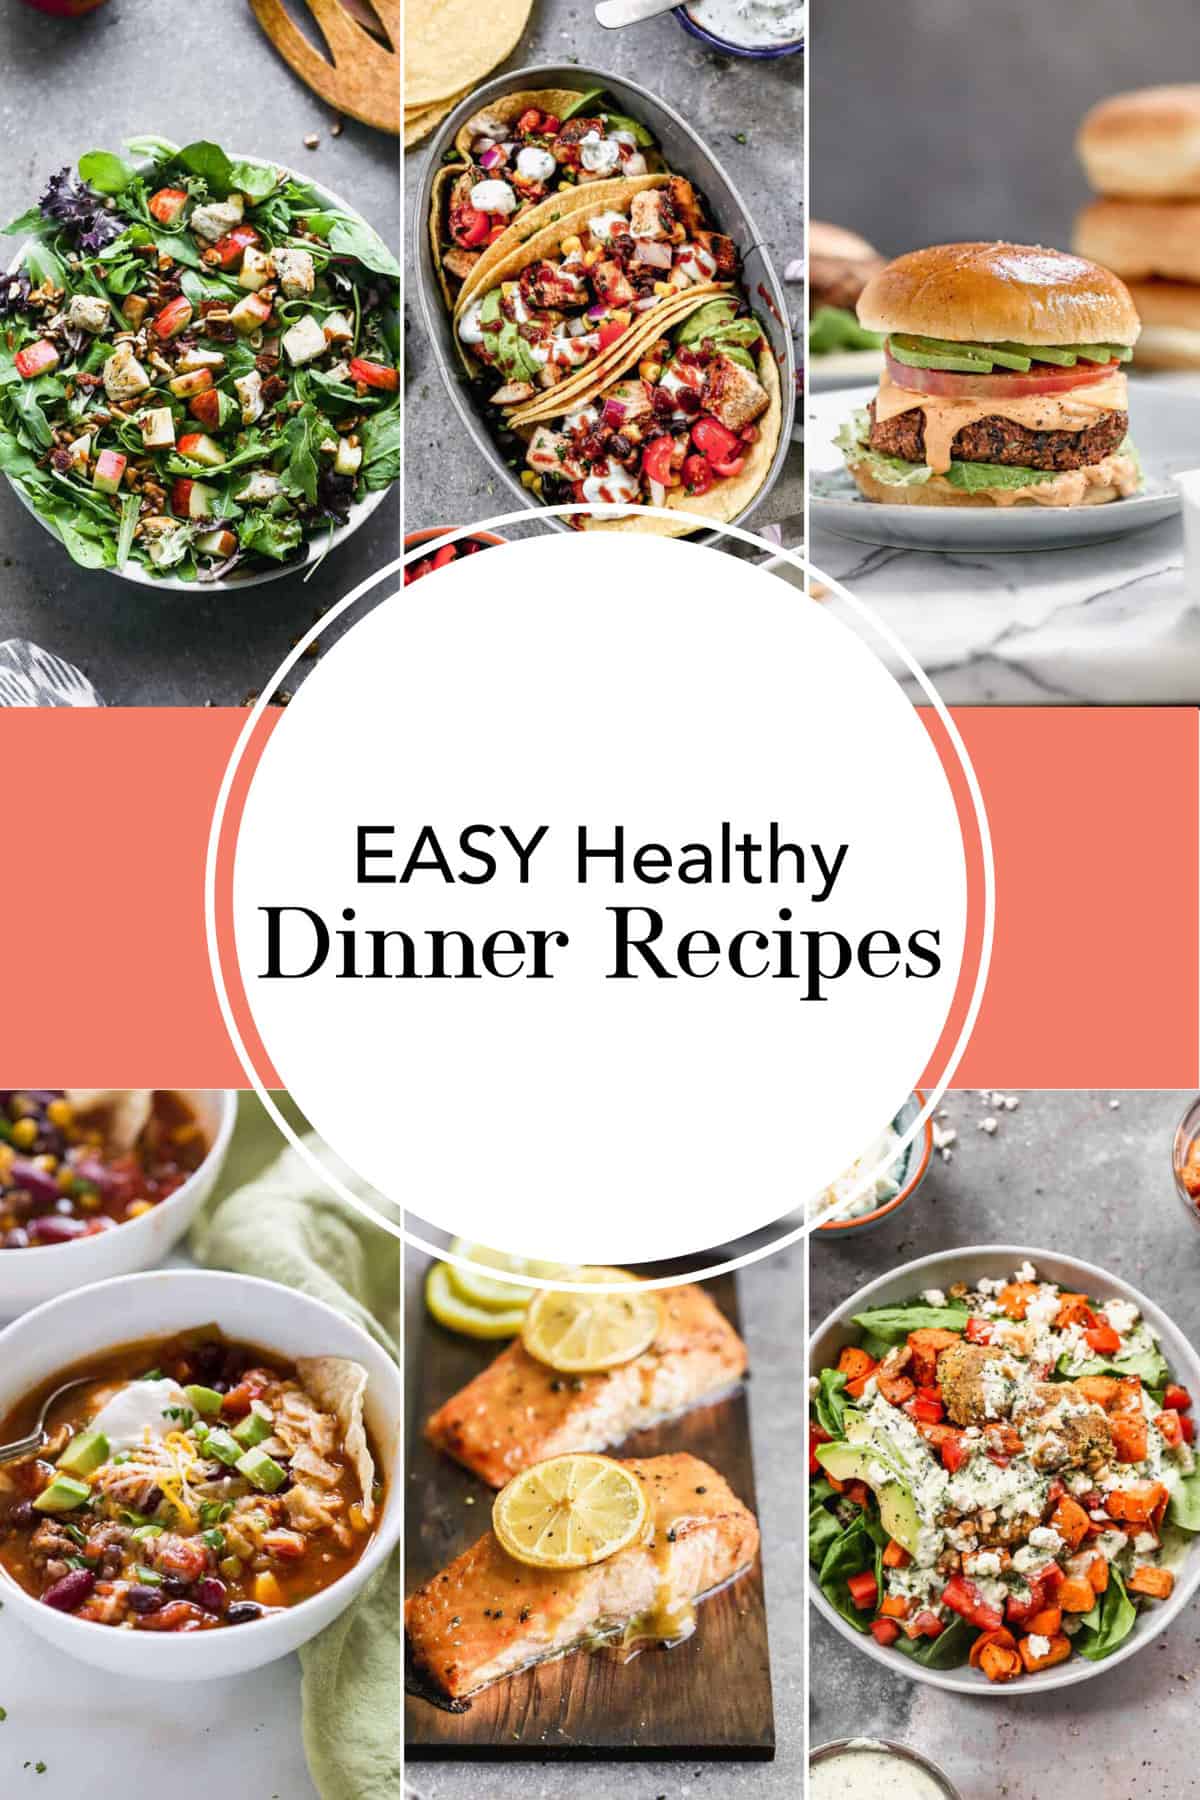 50+ Delicious Meal Prep Salads + FREE Printable Meal Planner